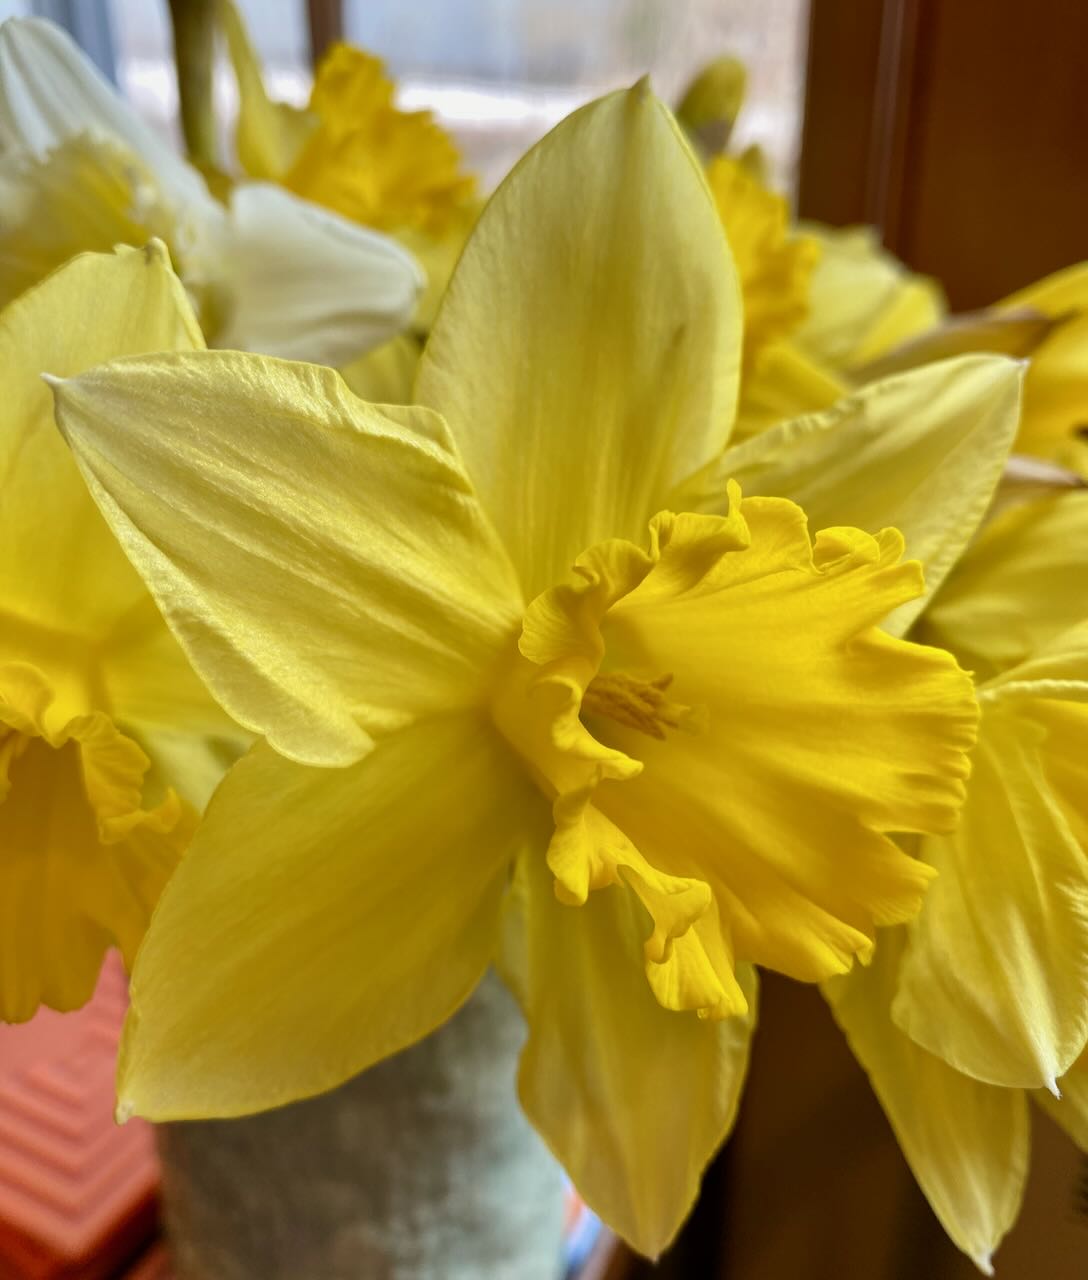 It's the weekend! Number 332, Closeup of Daffodils in a Vase